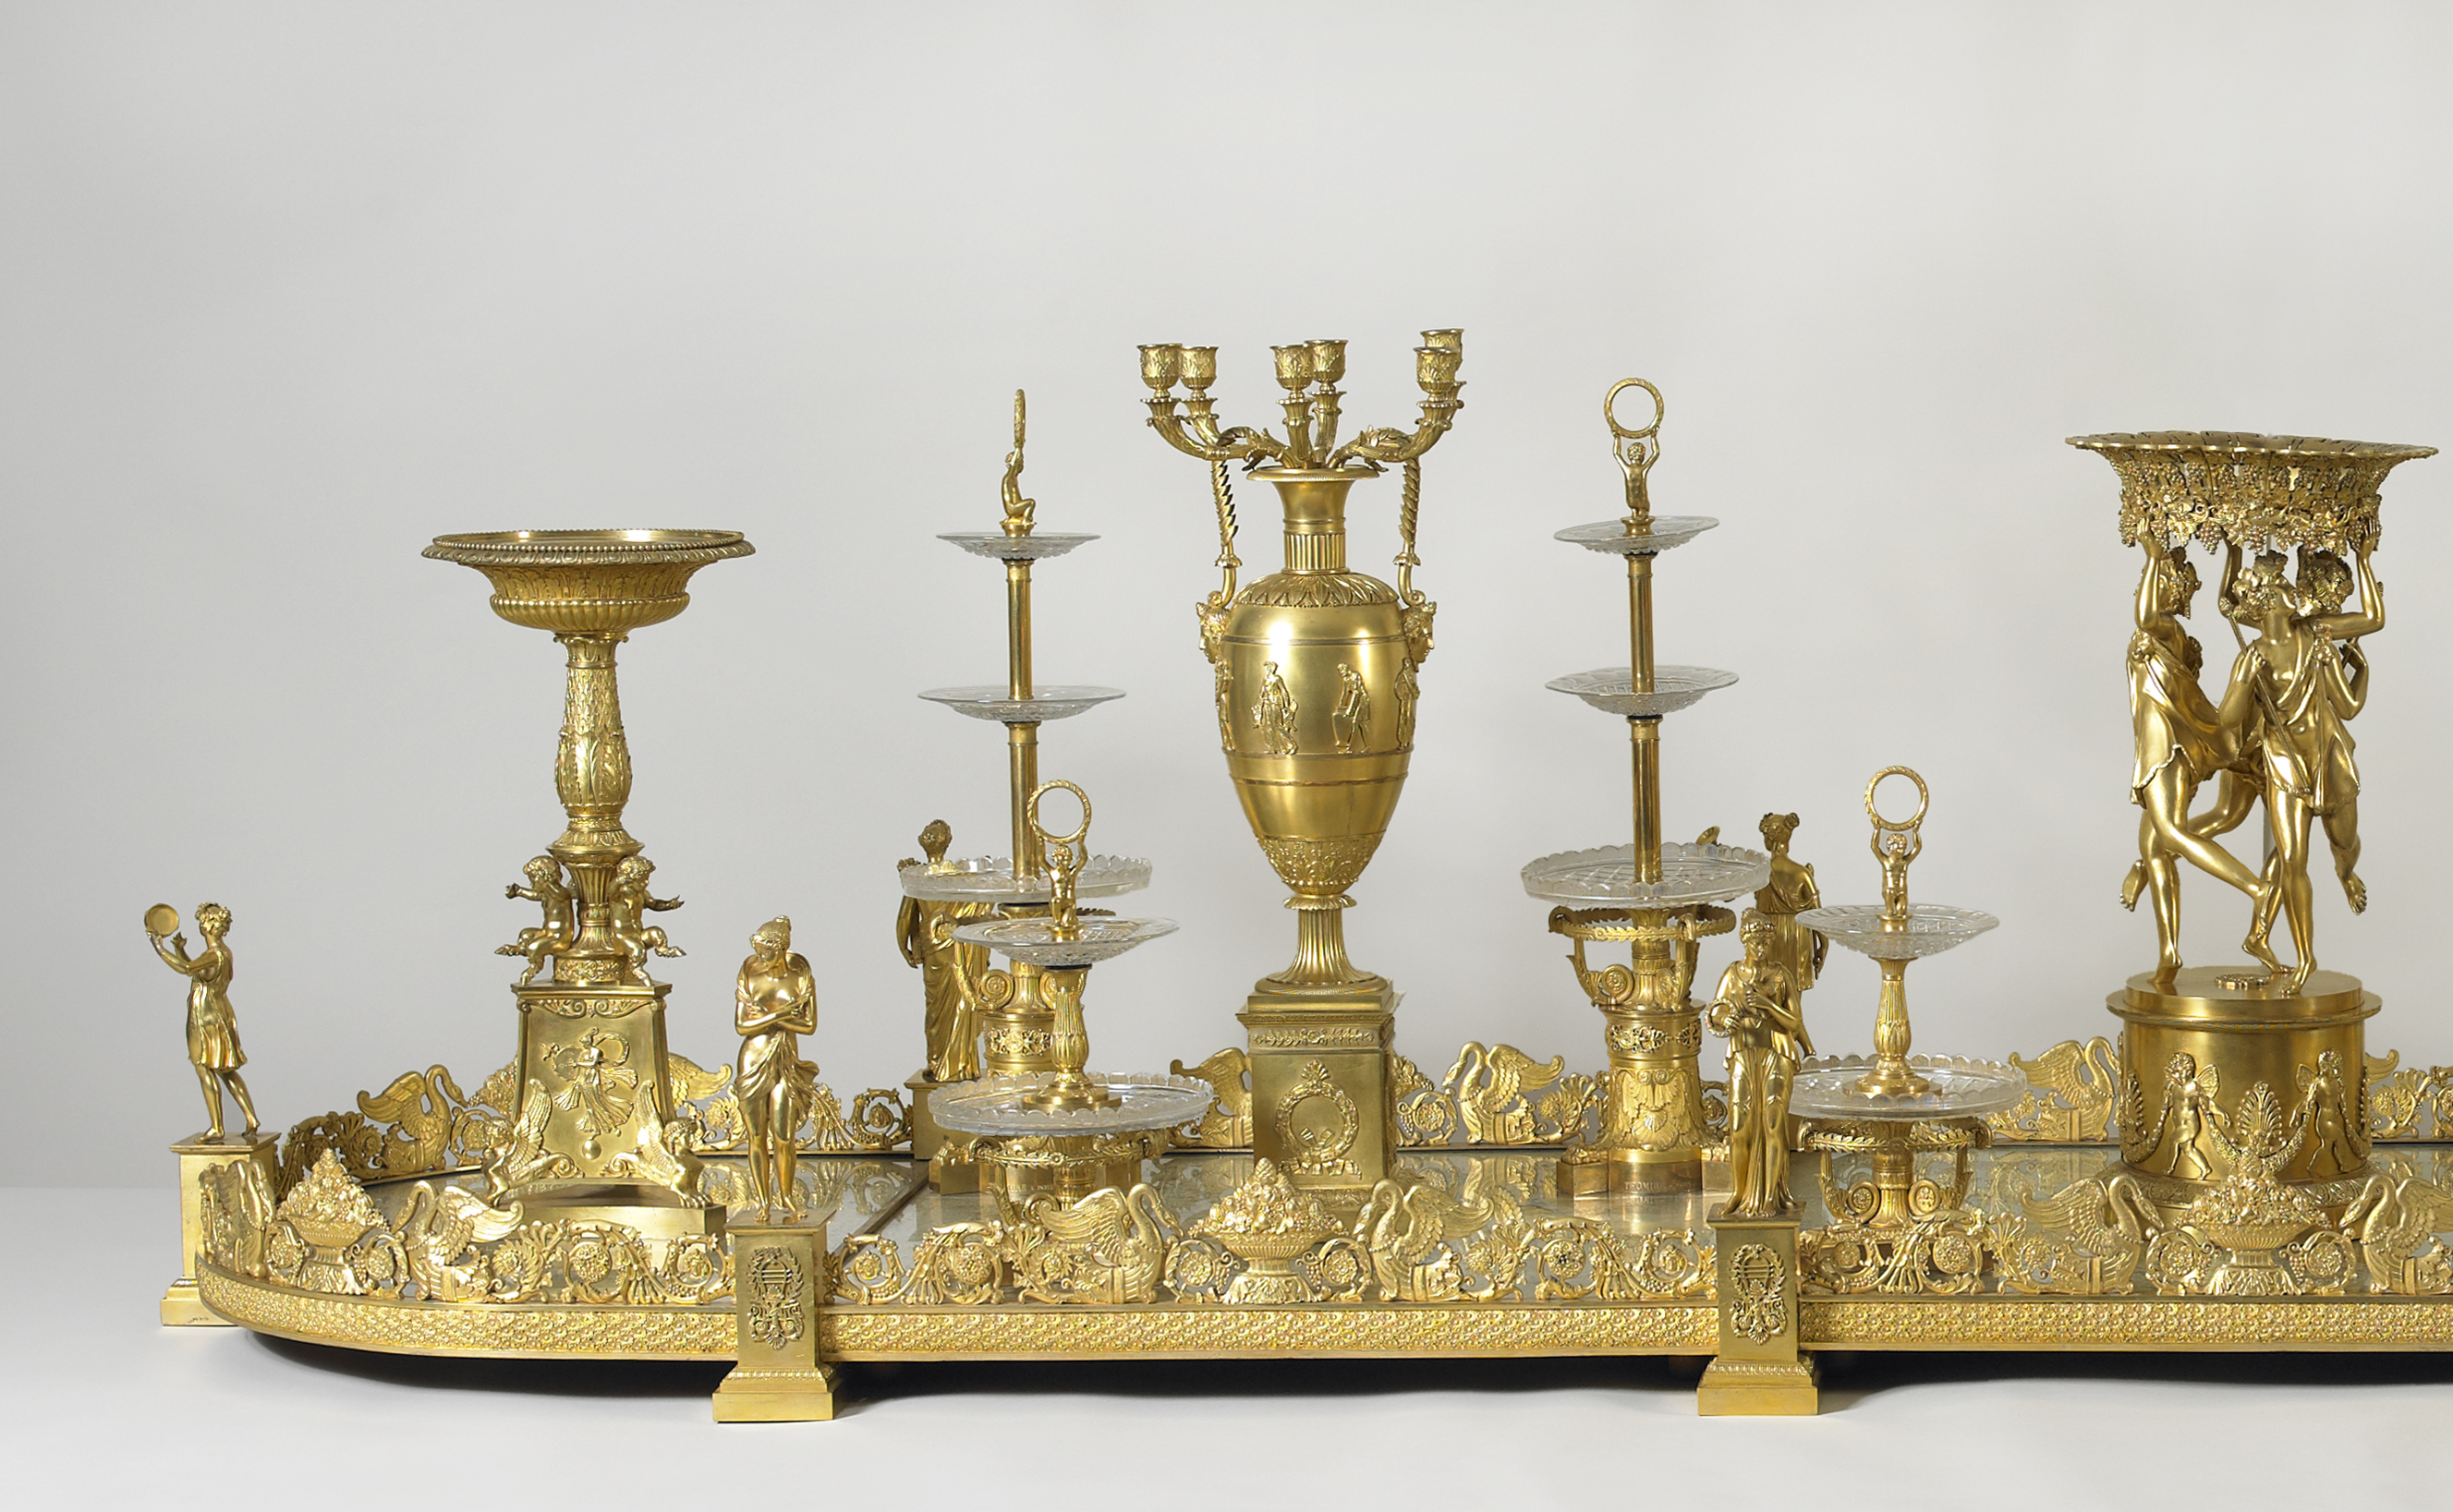 The long gilded surtout de table sits on a white background